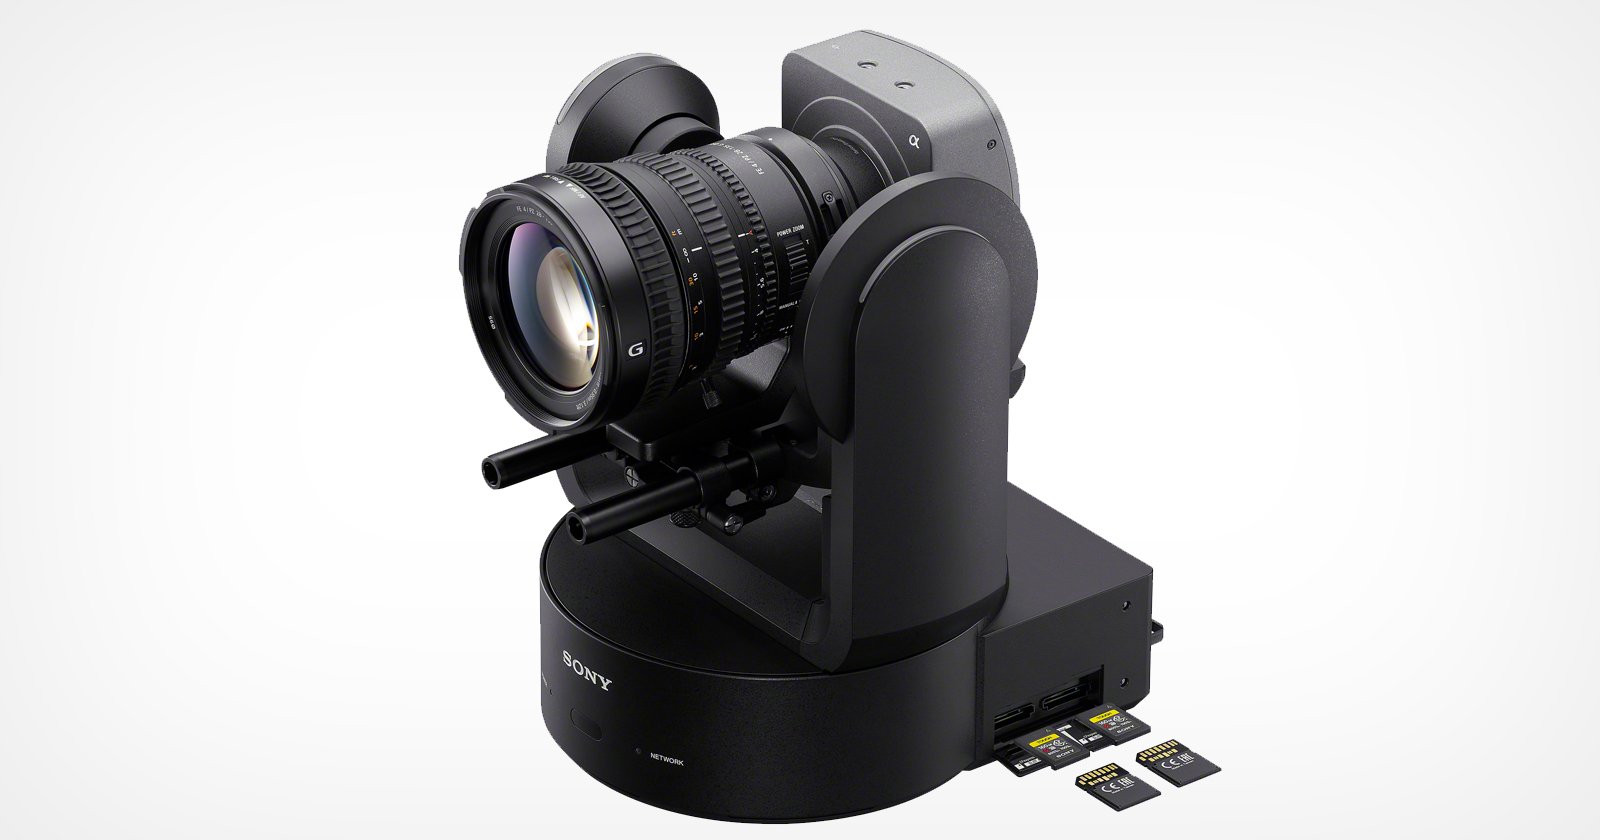 Sony's New FR7 is the World's First Full-Frame ILC Robotic Camera